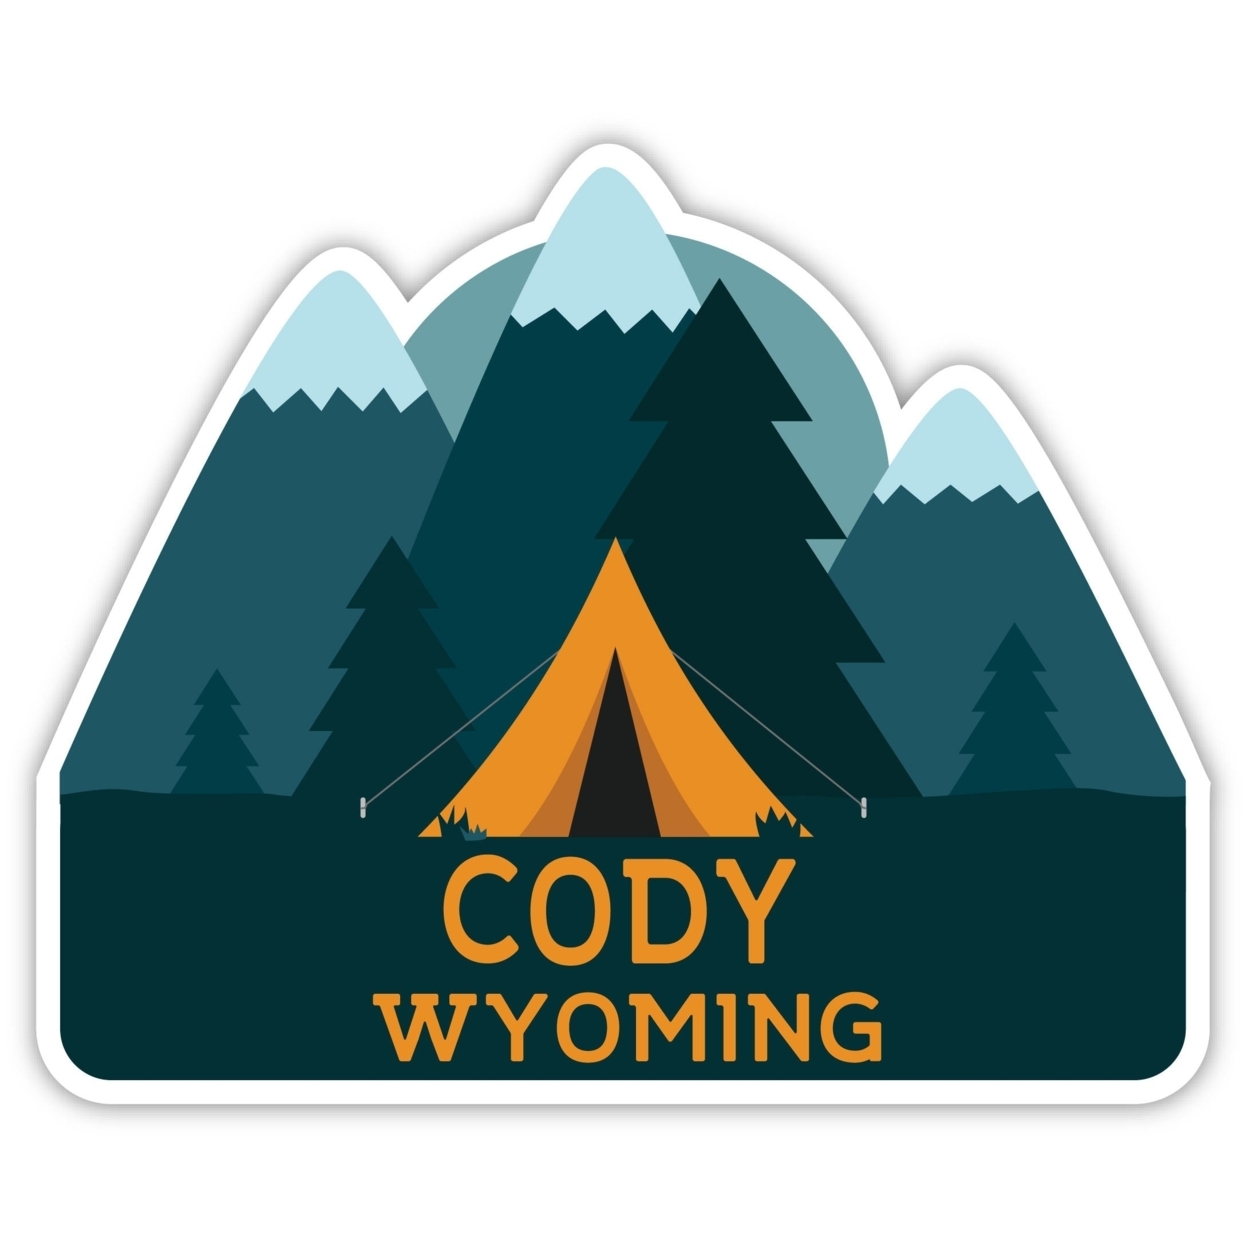 Cody Wyoming Souvenir Decorative Stickers (Choose Theme And Size) - Single Unit, 8-Inch, Adventures Awaits